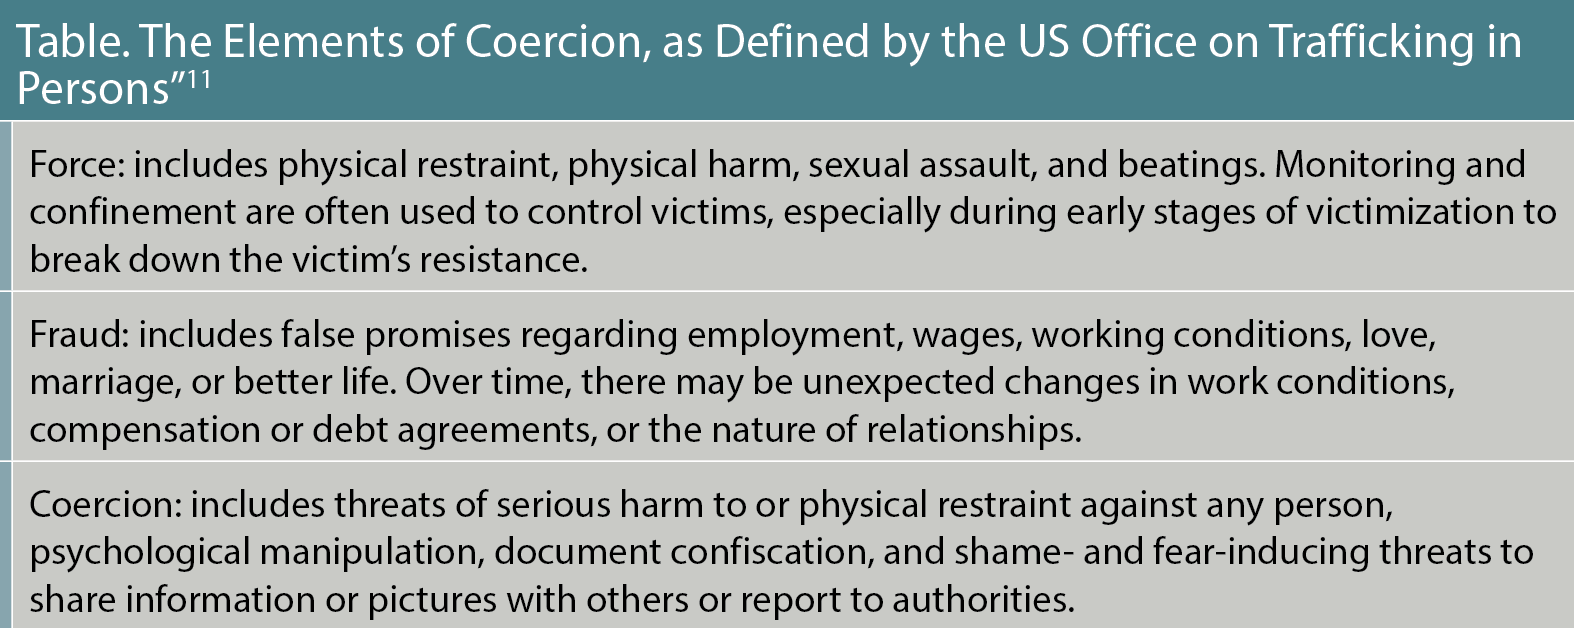 Table. The Elements of Coercion, as Defined by the US Office on Trafficking in Persons